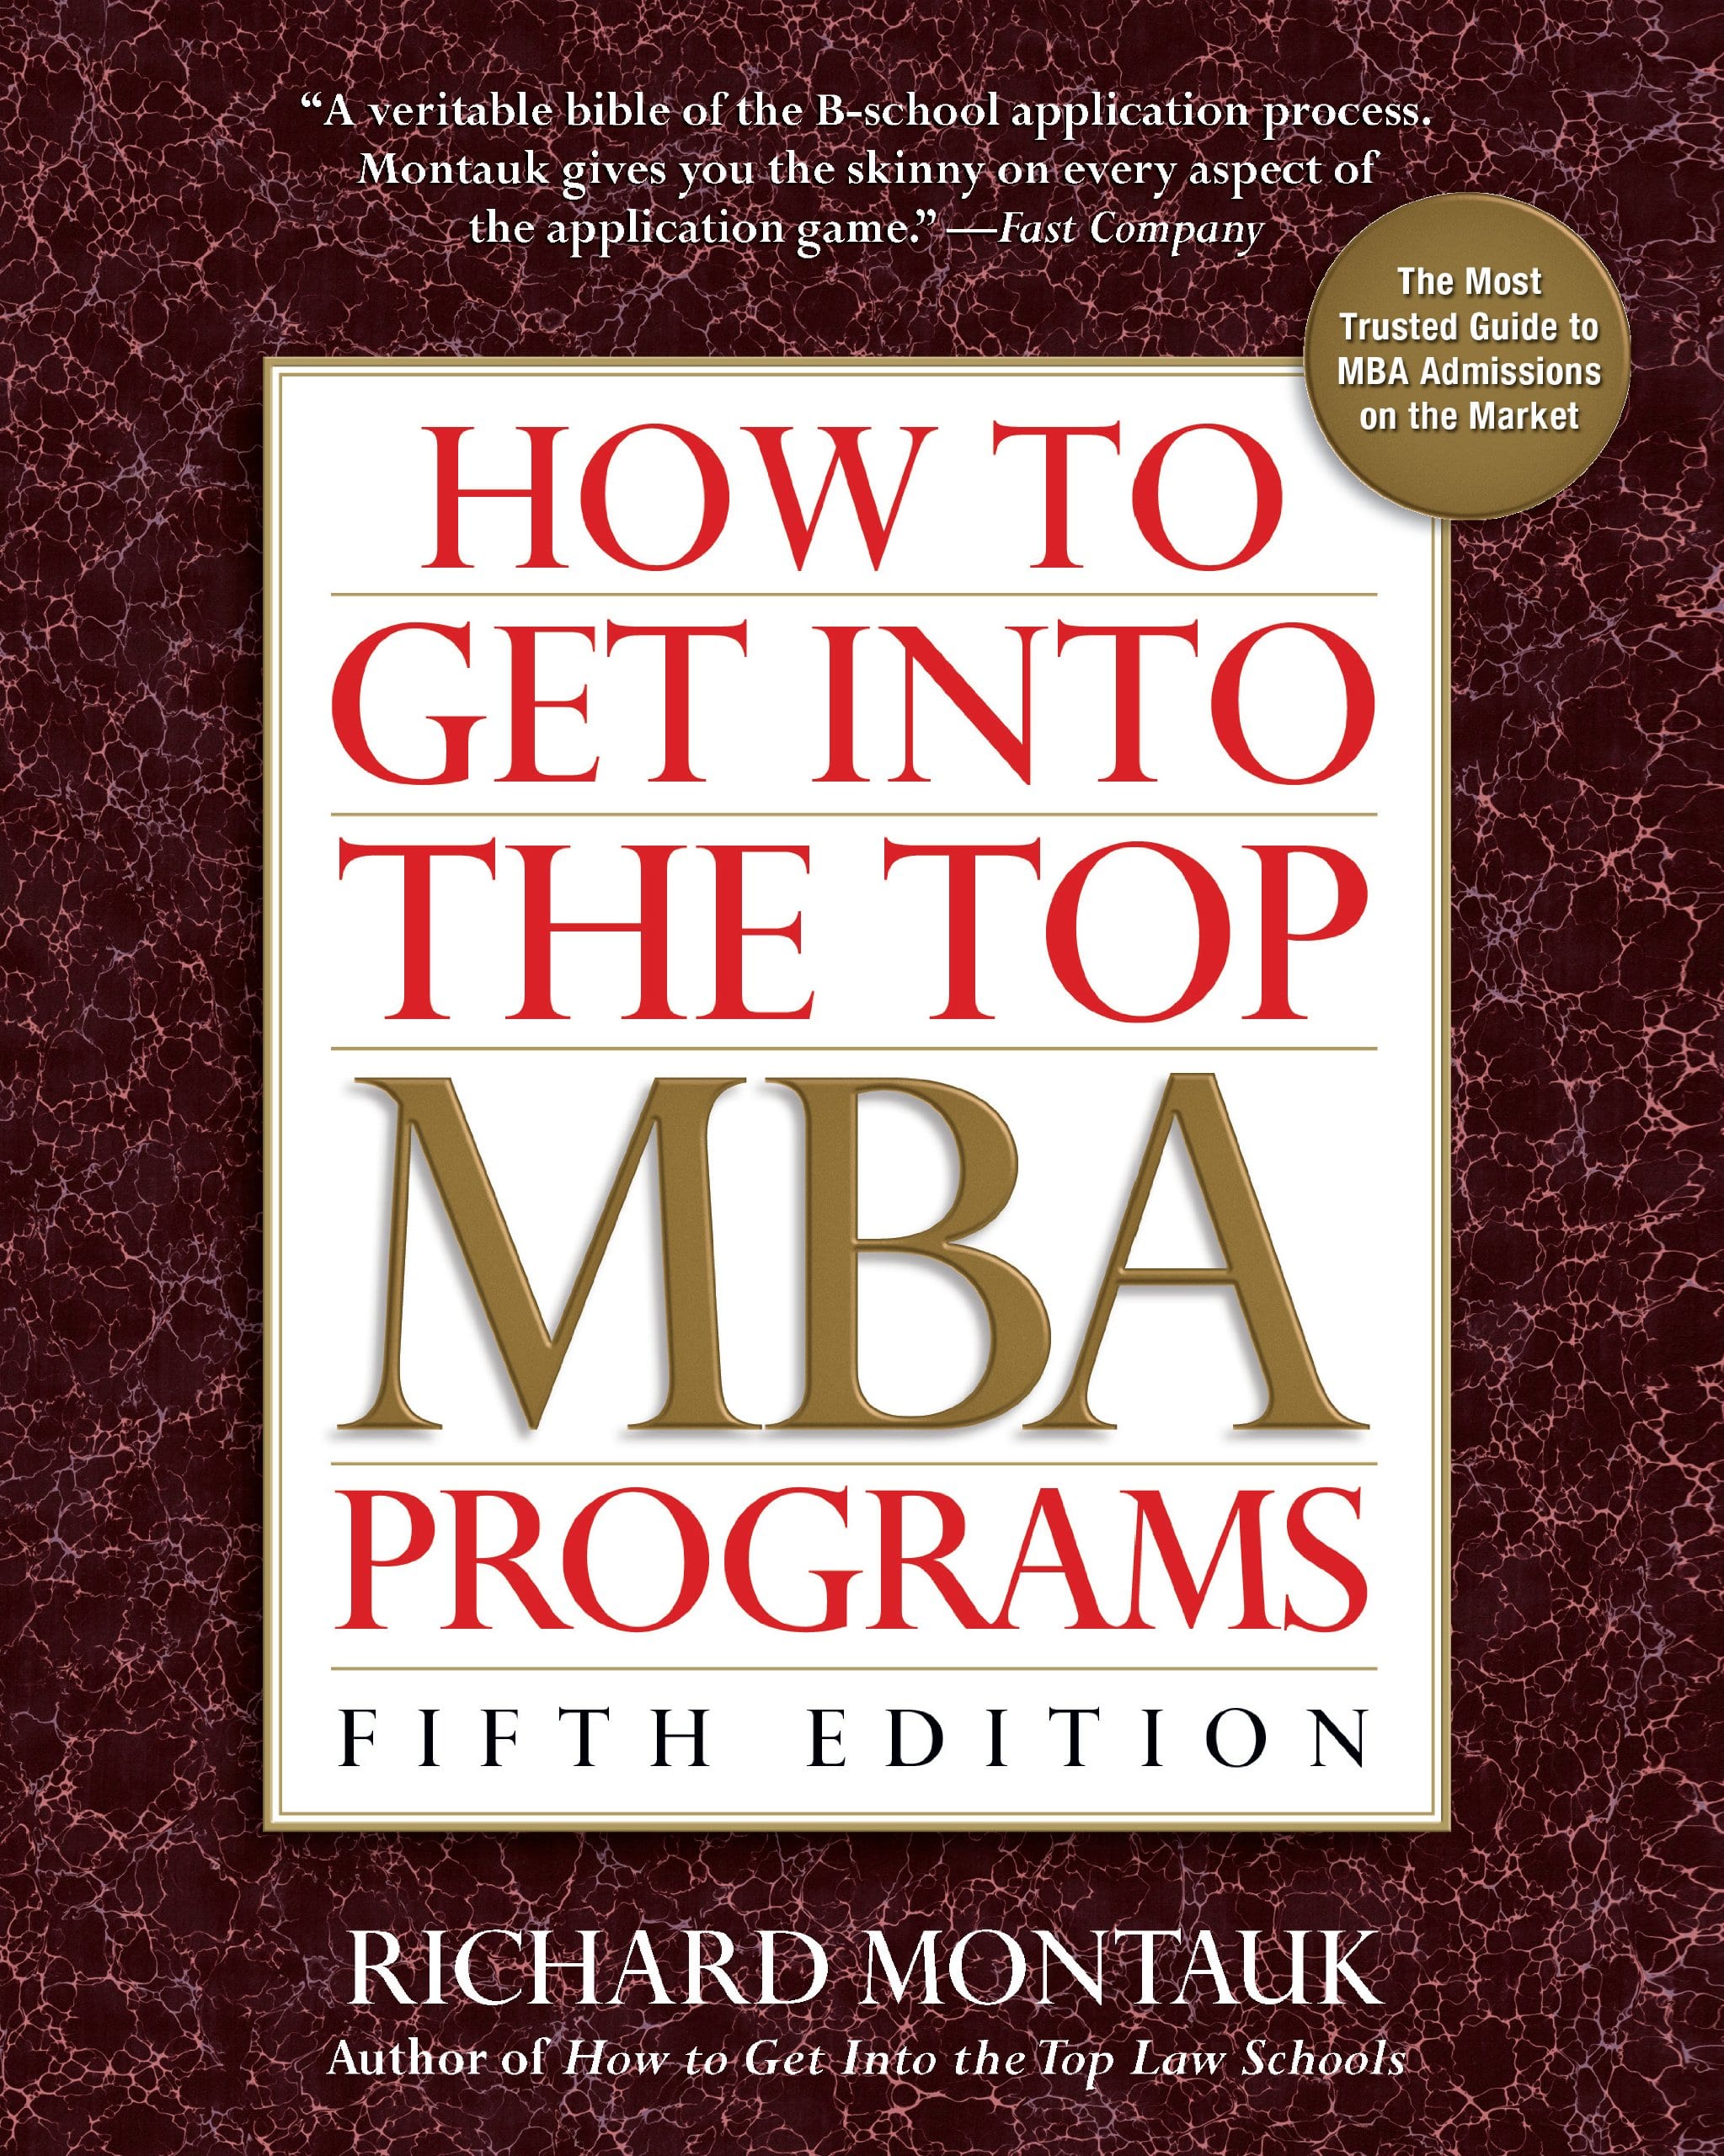 Managers, Get ready to go back to school for an Executive MBA program